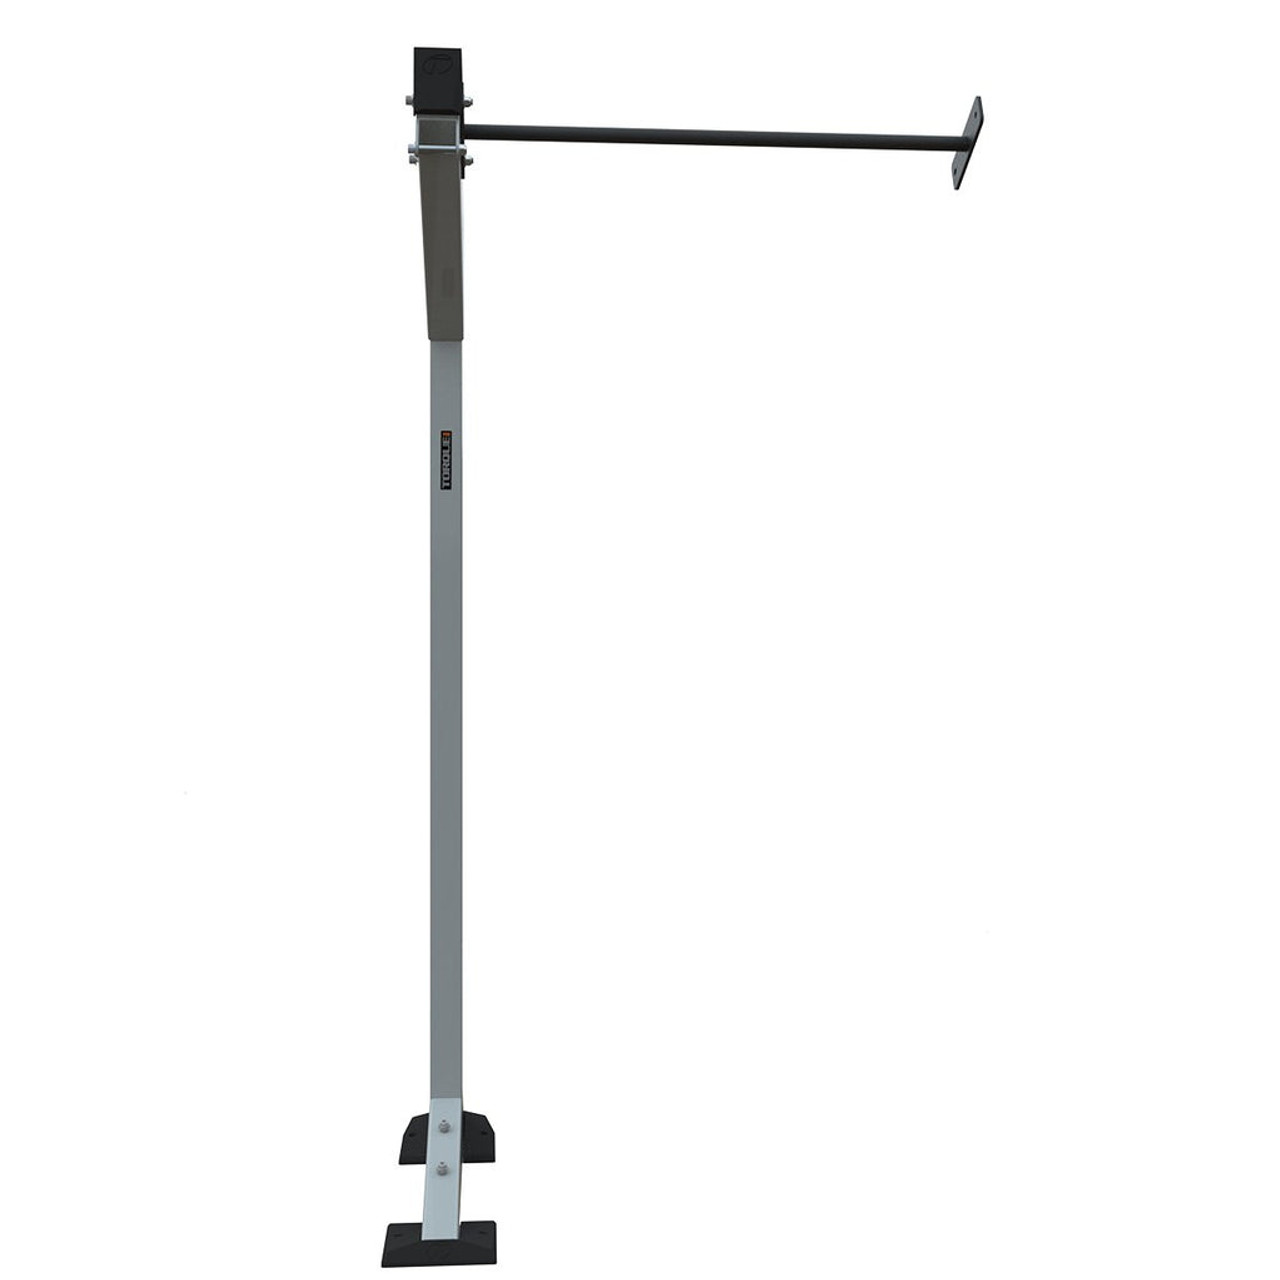 Torque 8 Ft (2.4 M) Upright Module Extension | The Fitness Outlet